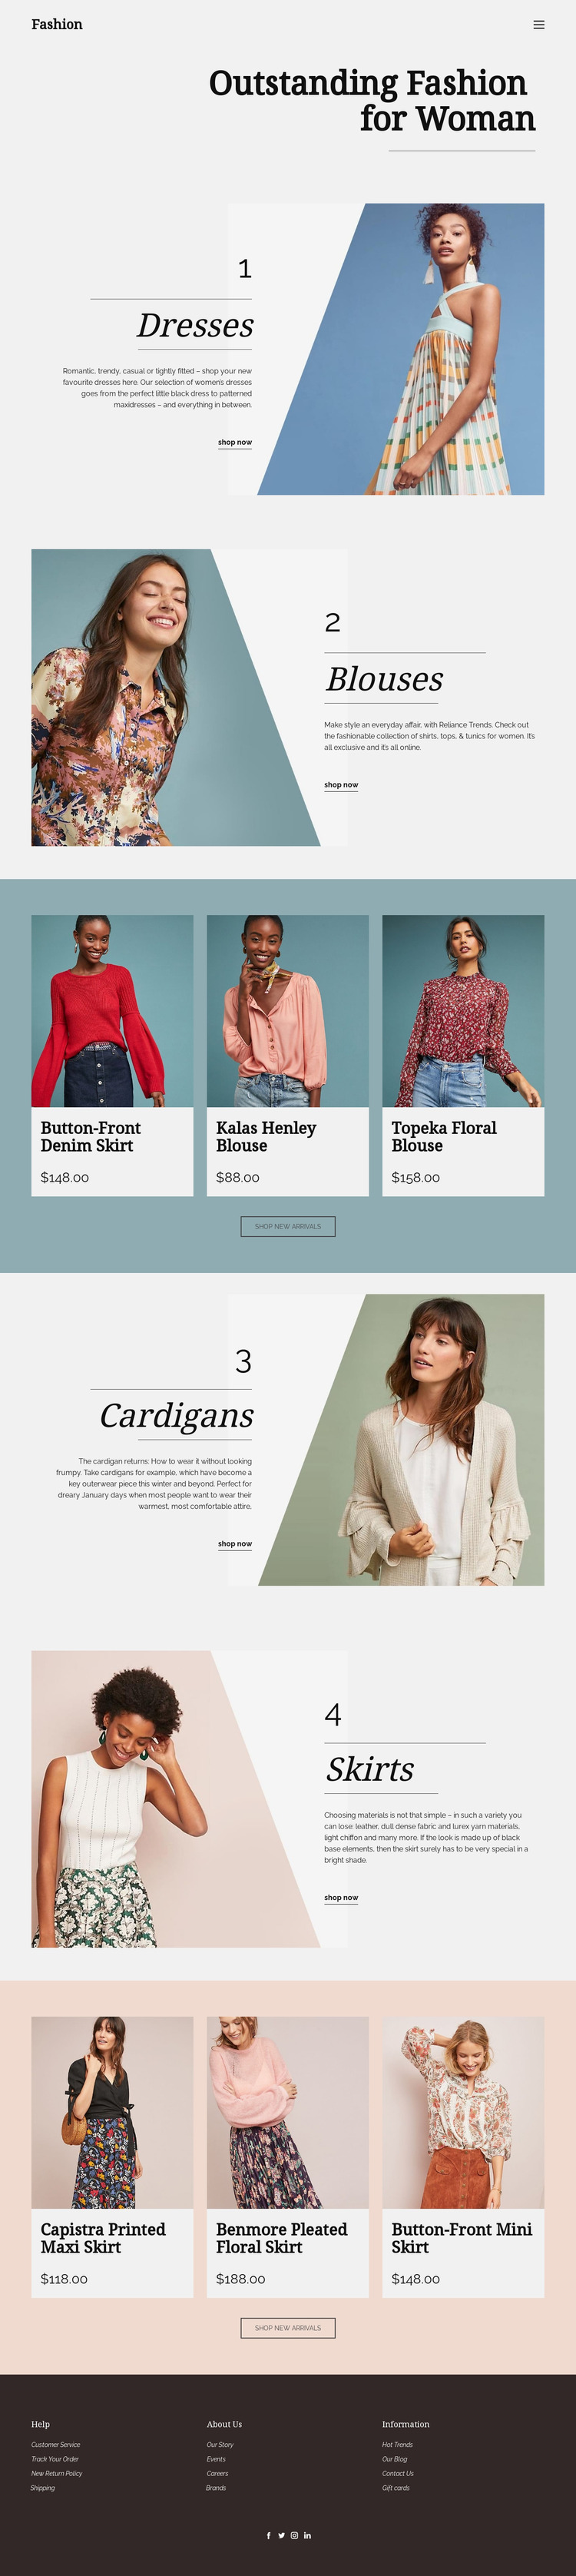 Fashion for Woman Website Mockup